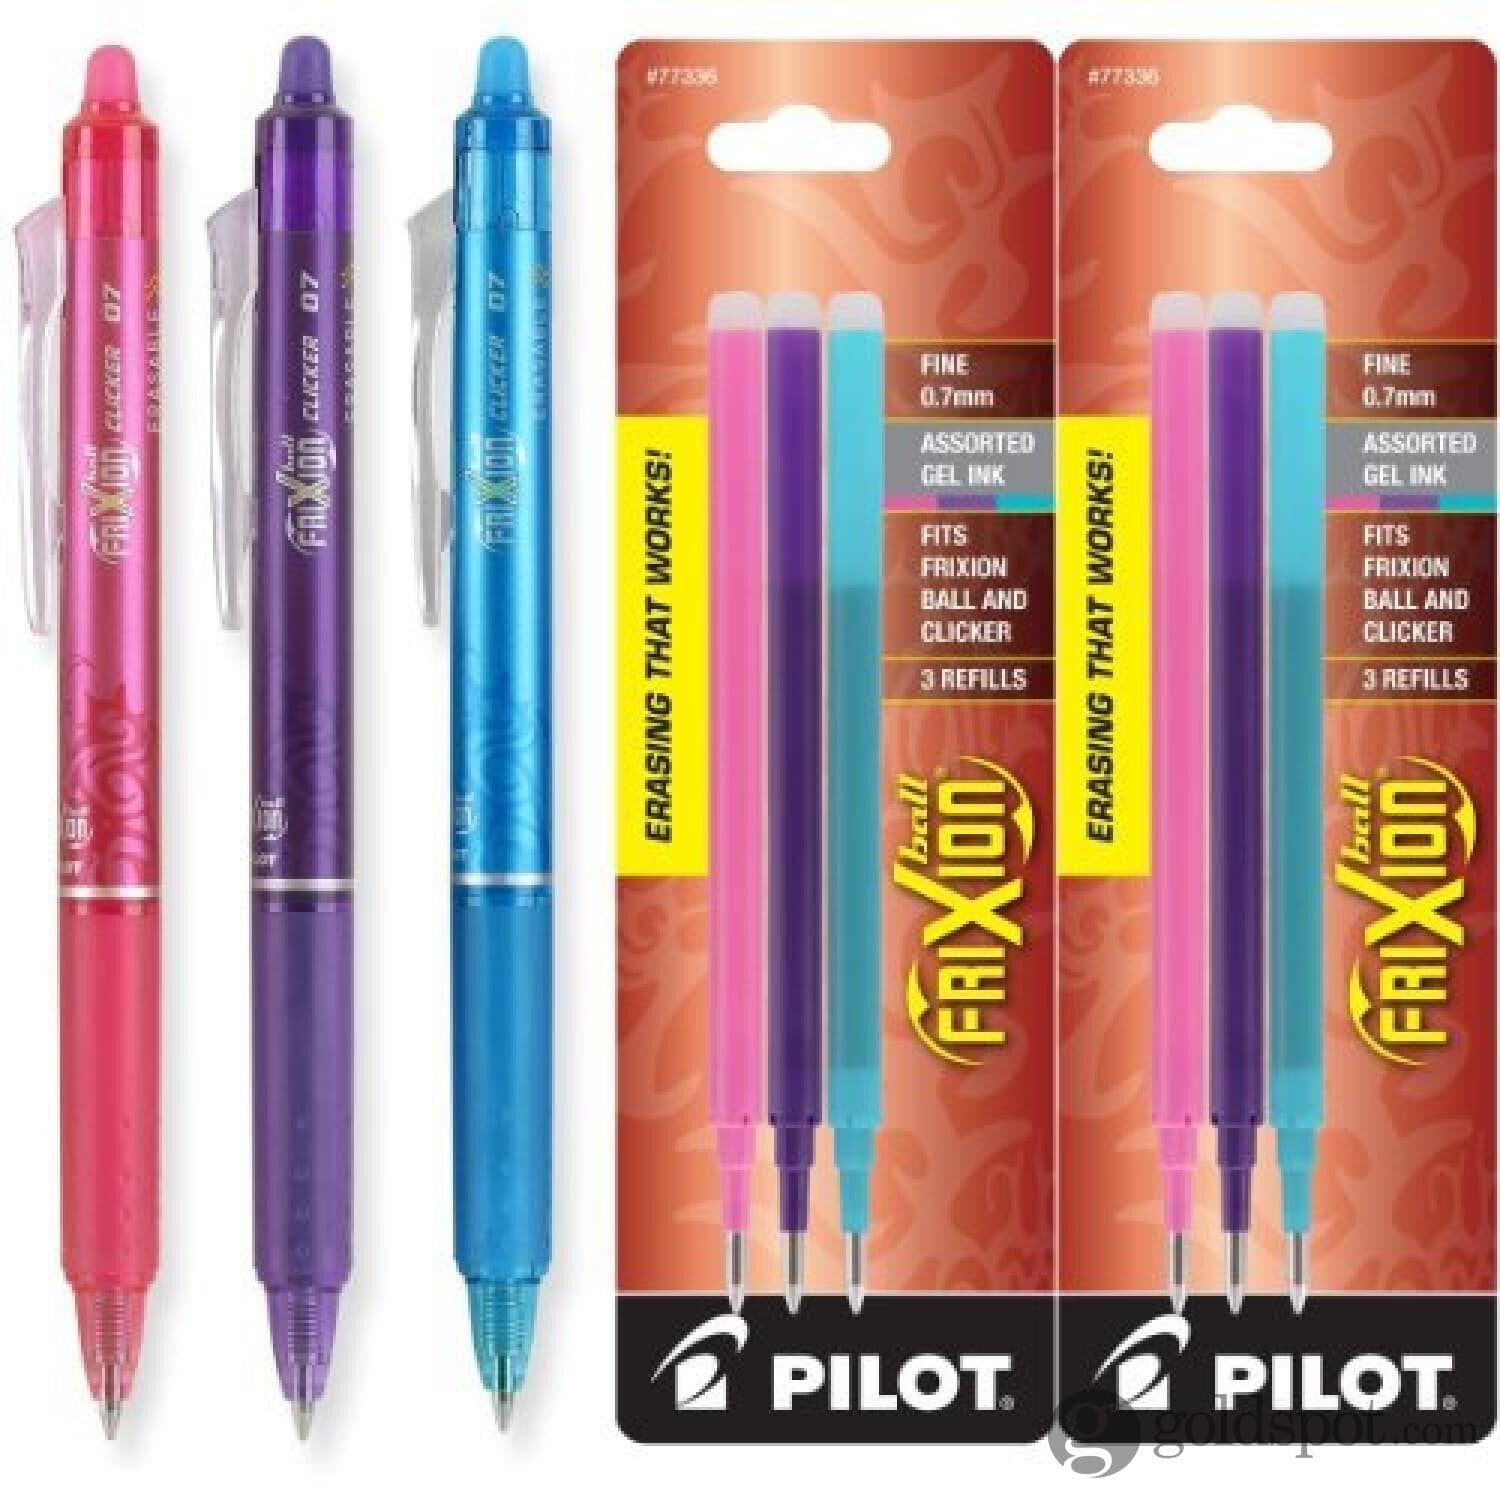 Pilot, FriXion Ball Gel Ink Refills for Erasable Pens, Fine Point 0.7 mm,  Pack of 3, Blue